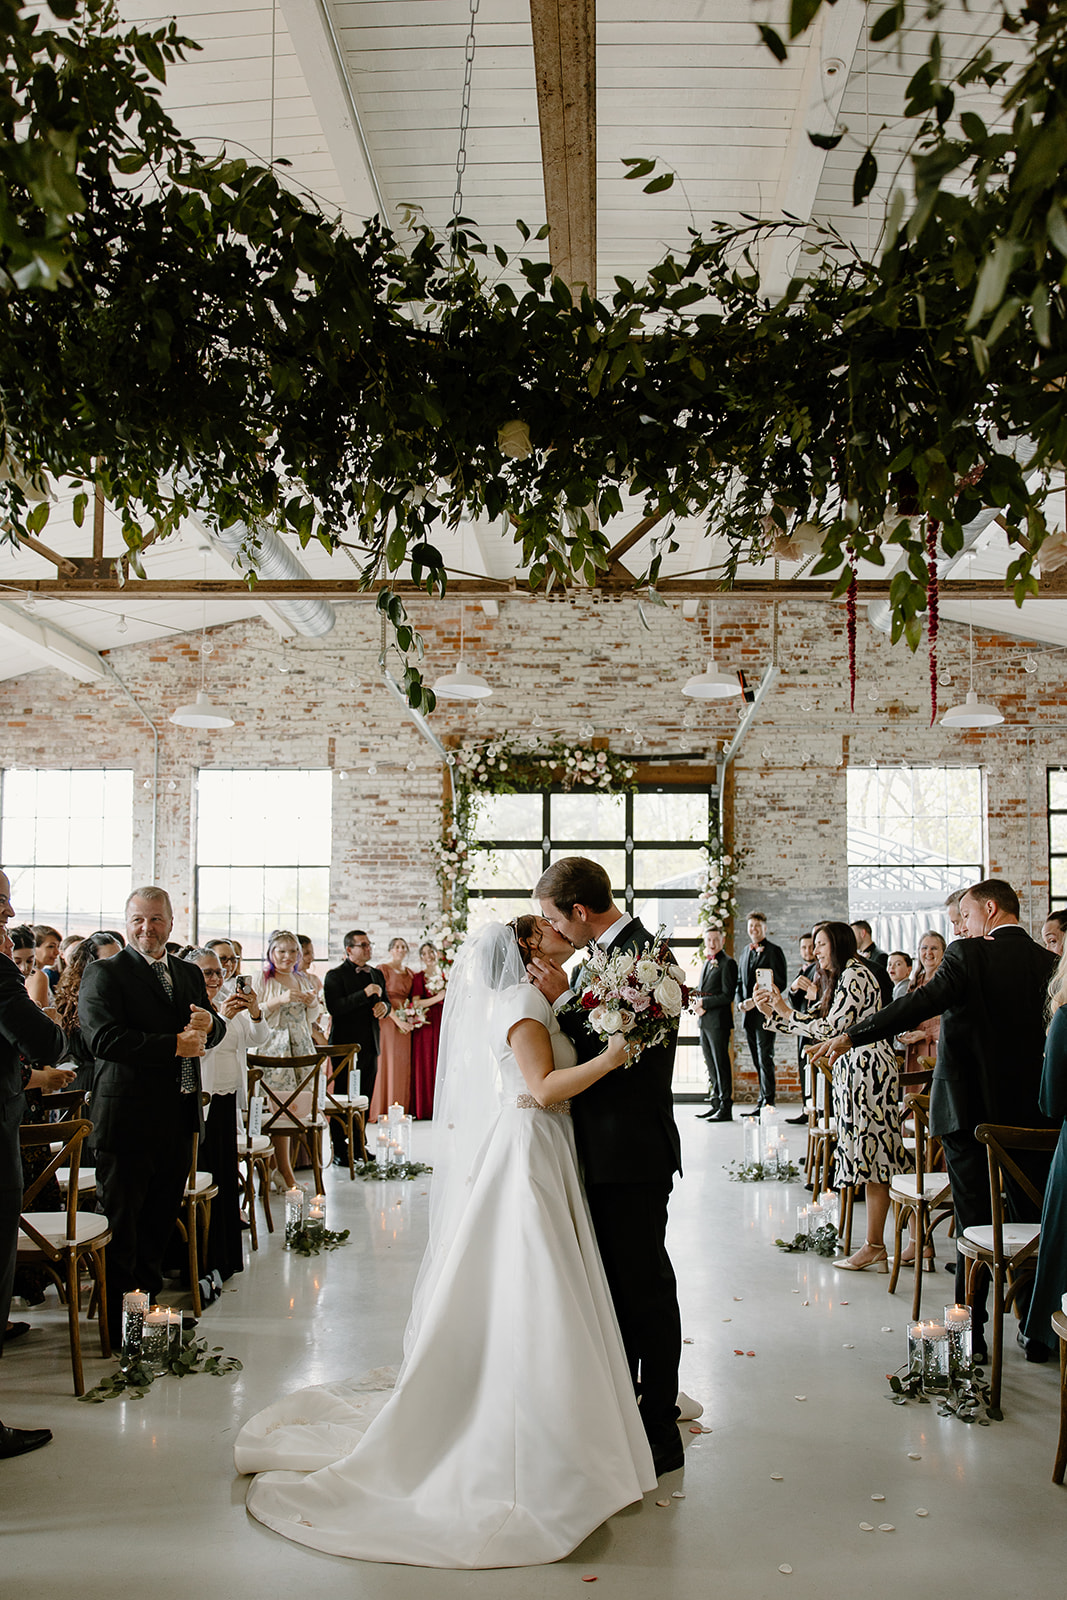 Wedding ceremony, The Graham Mill, best North Carolina wedding venues by NC wedding photographers and videographers